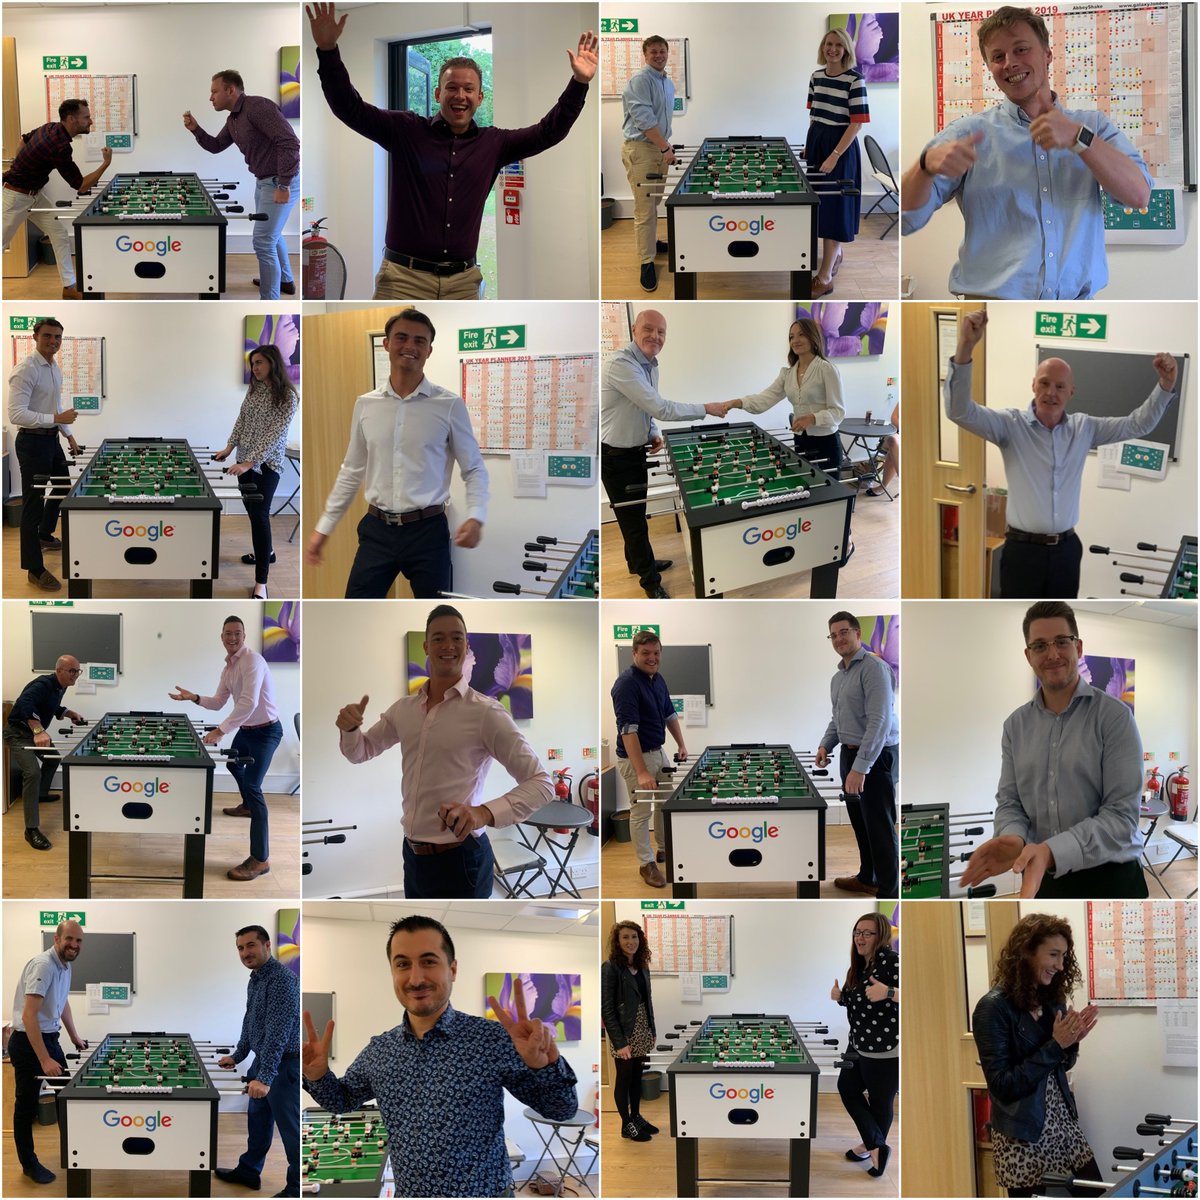 🎉 That’s the knockout round completed for our MRS #FoosballTournament 🎉 
Our quarter-finalists are…

Ryan
Scott
Adam
Michele
Joe
Mike
Matt
Emma

Bring on the games 💪